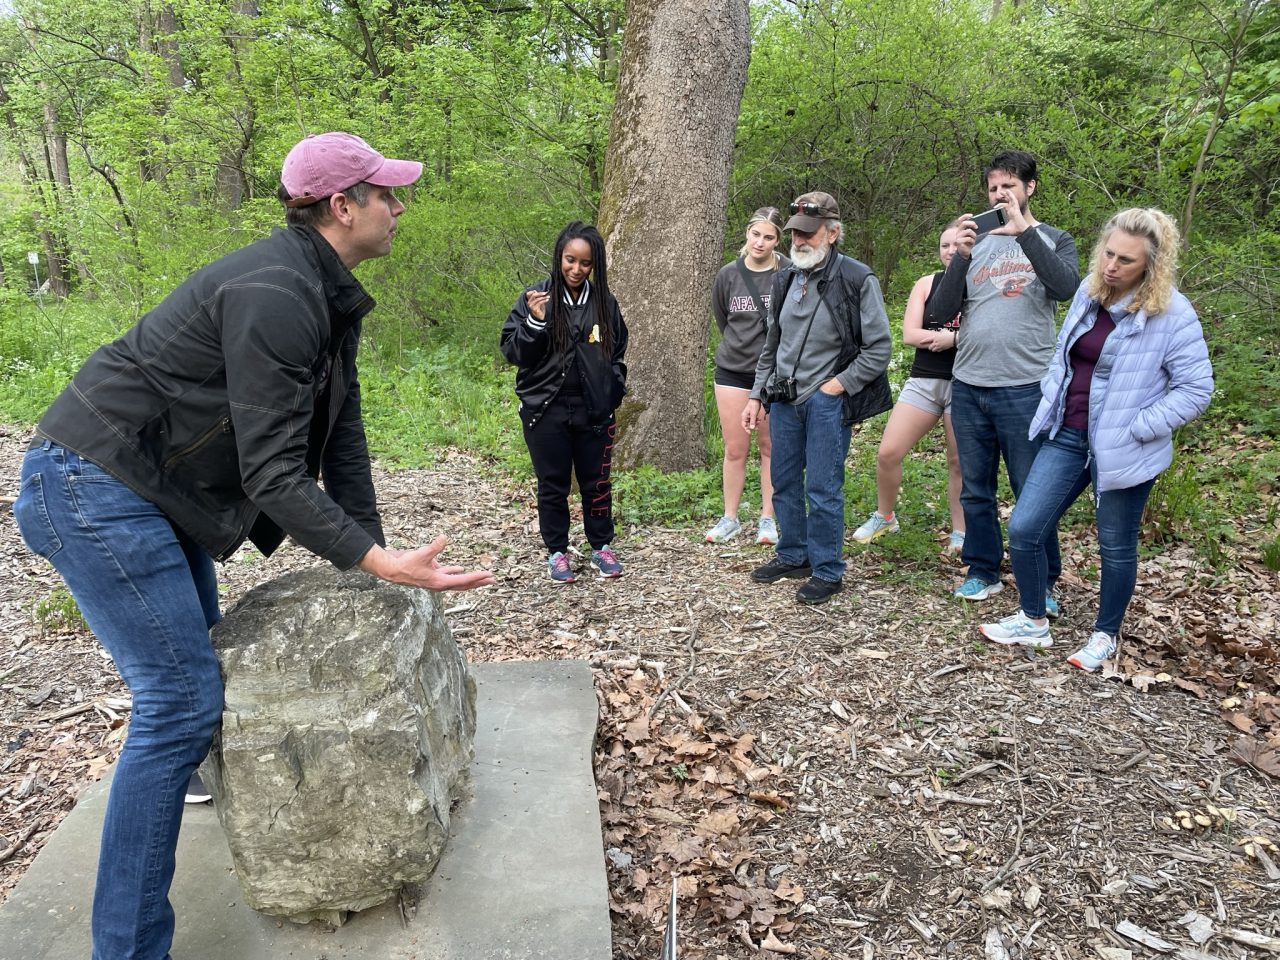 Lafayette College geology professor Dave Sunderlin stands by a large rock and talks to several people during the Walk with Profs event on the Karl Stirner Arts Trail in Easton, Pennsylvania.